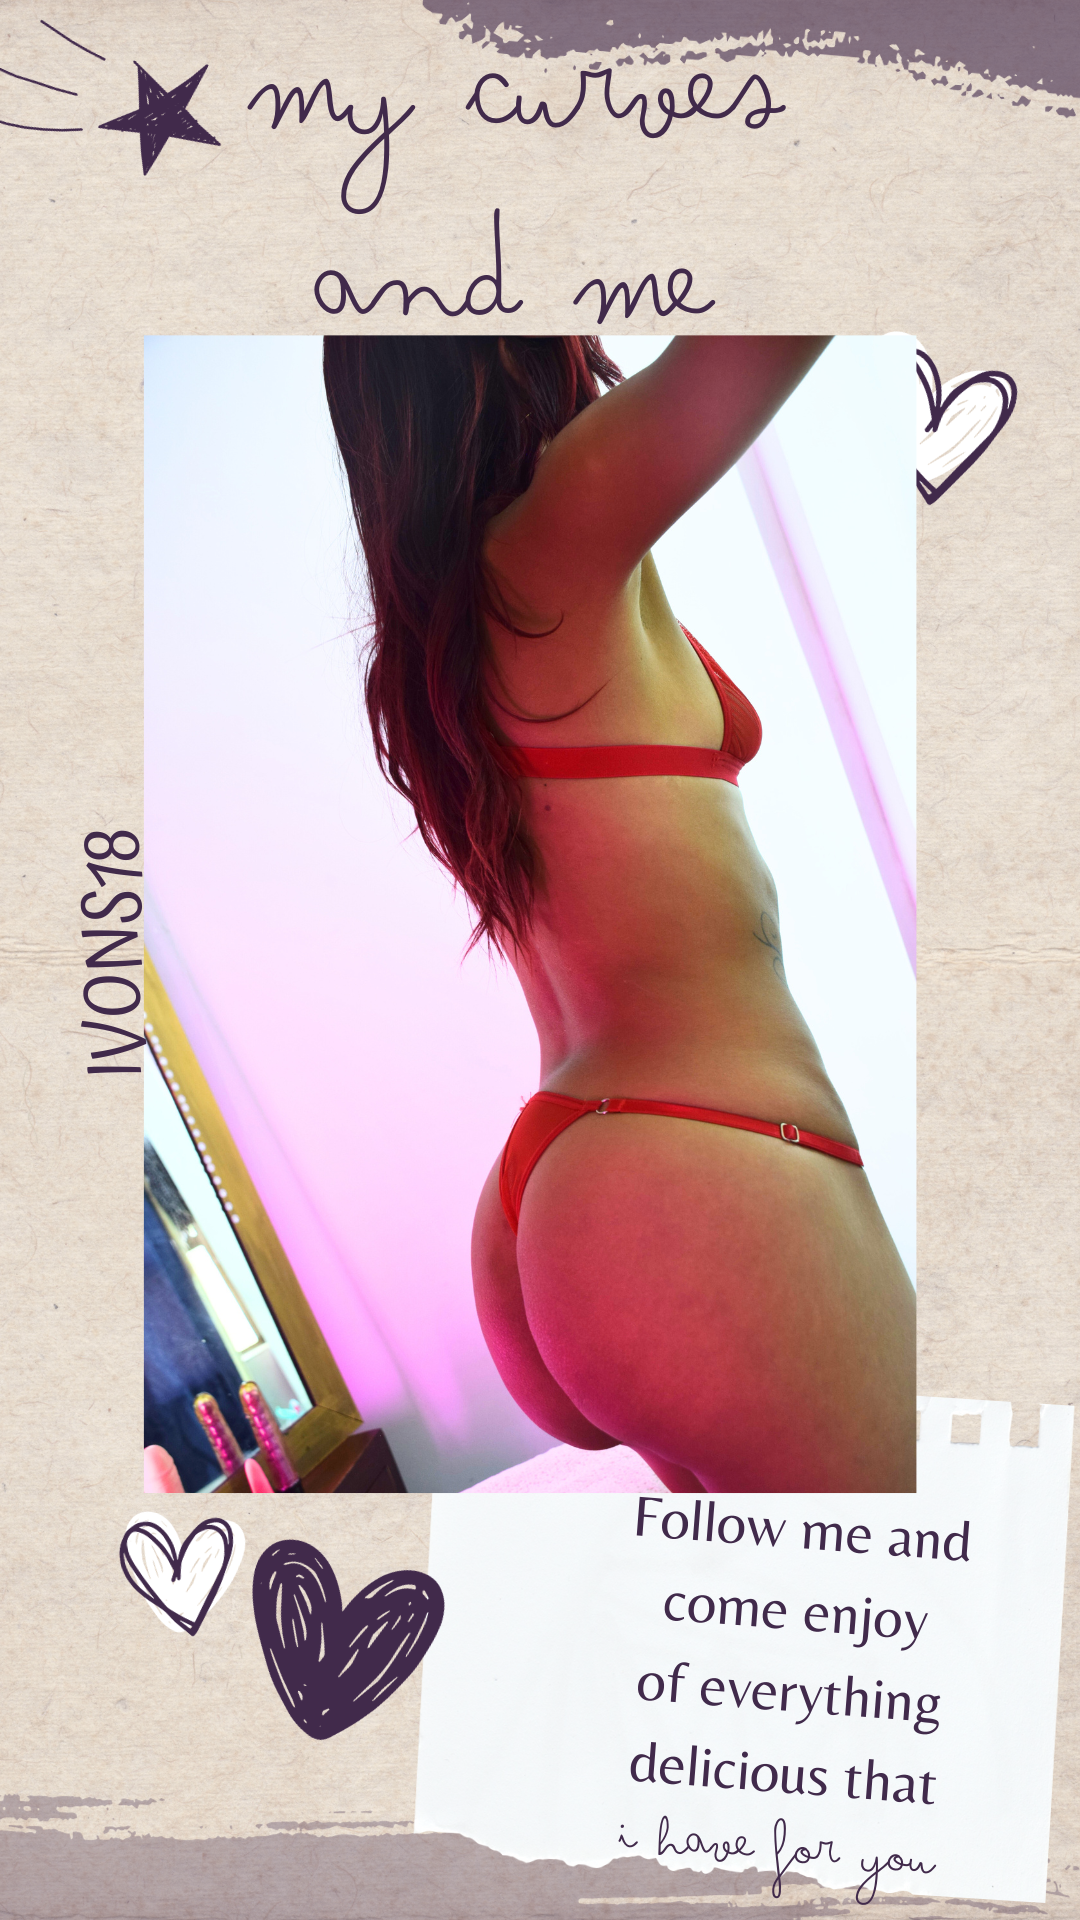 Ivons18 my curves image: 1